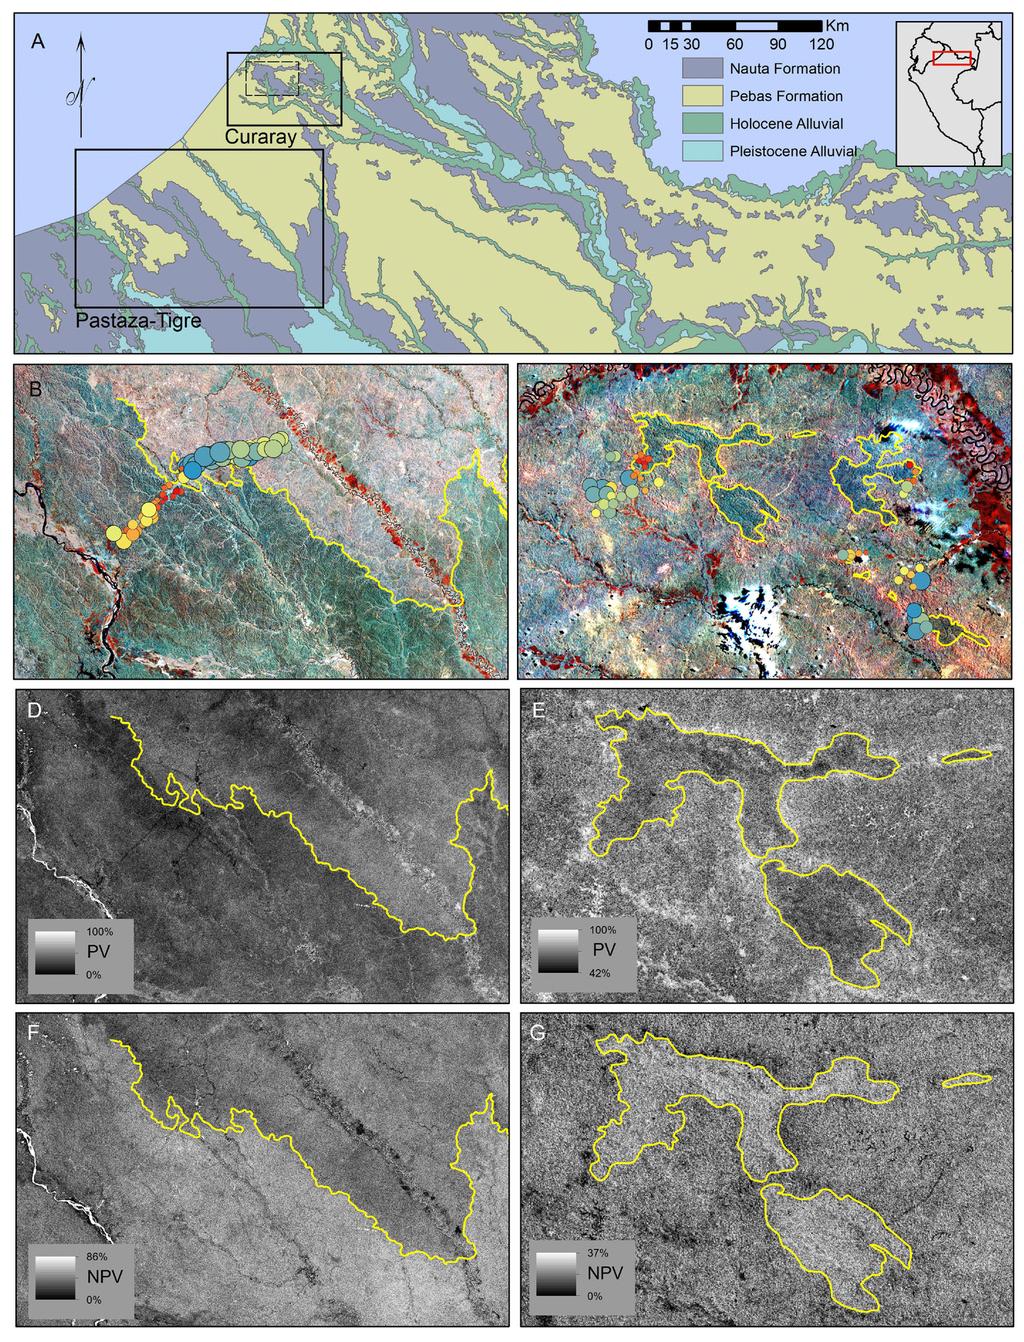 M. A. Higgins et al.: Variation in PV and NPV along edaphic and compositional gradients 3507 Figure 1. Patterns in geology, soils, plant species composition, and PV and NPV at sites in northern Peru.